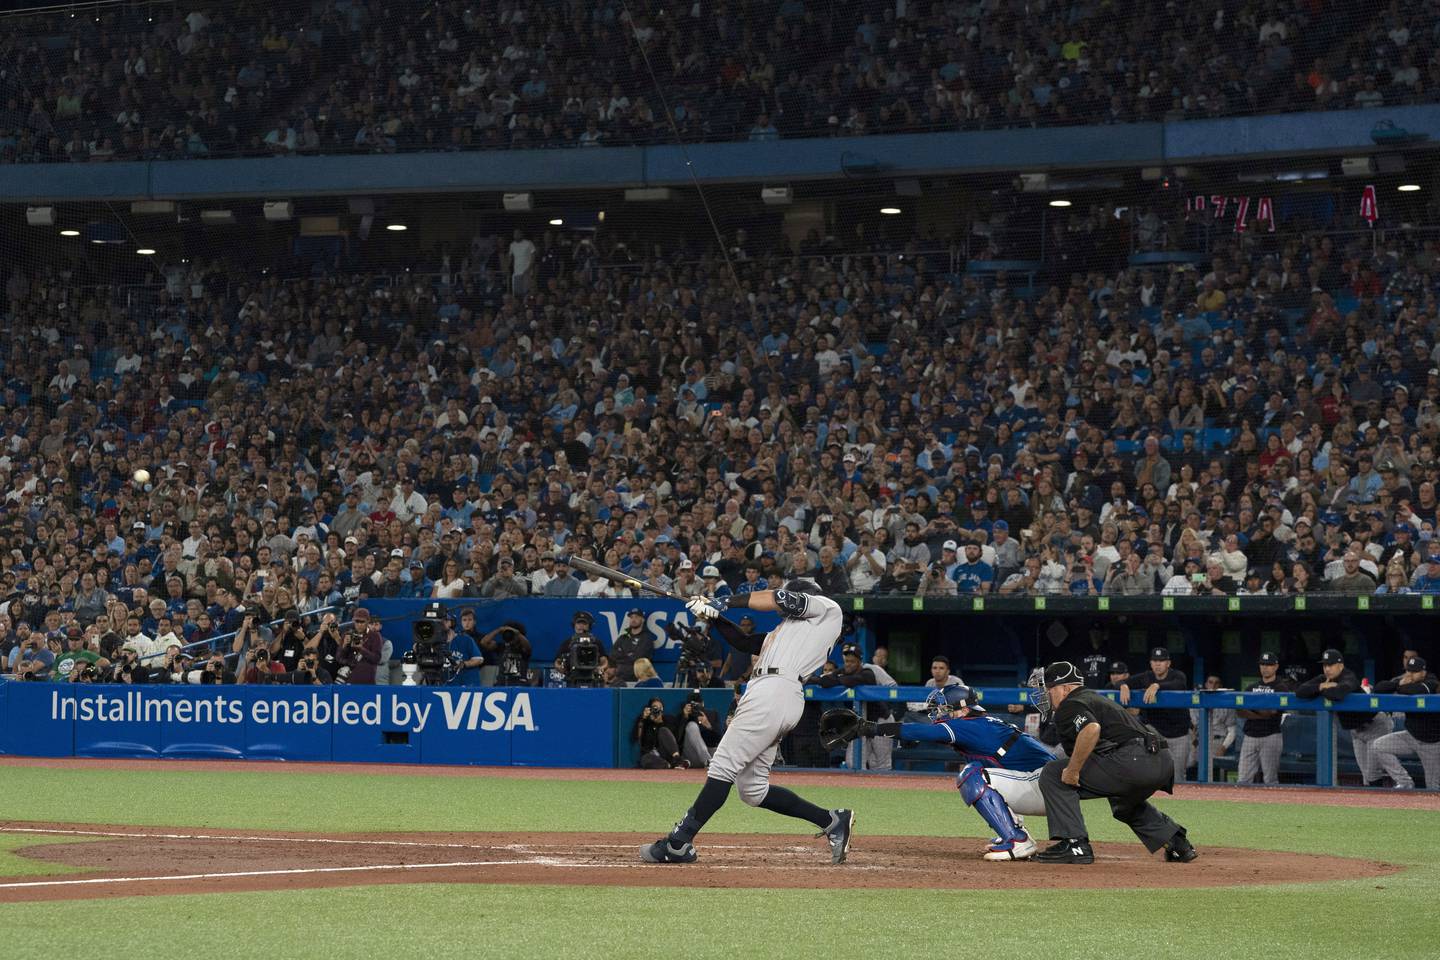 New York Yankees' Aaron Judge  hits his 61st home run of the season, a two-run homer against the Toronto Blue Jays during seventh inning of a baseball game Wednesday, Sept. 28, 2022, in Toronto. (Alex Lupul/The Canadian Press via AP)